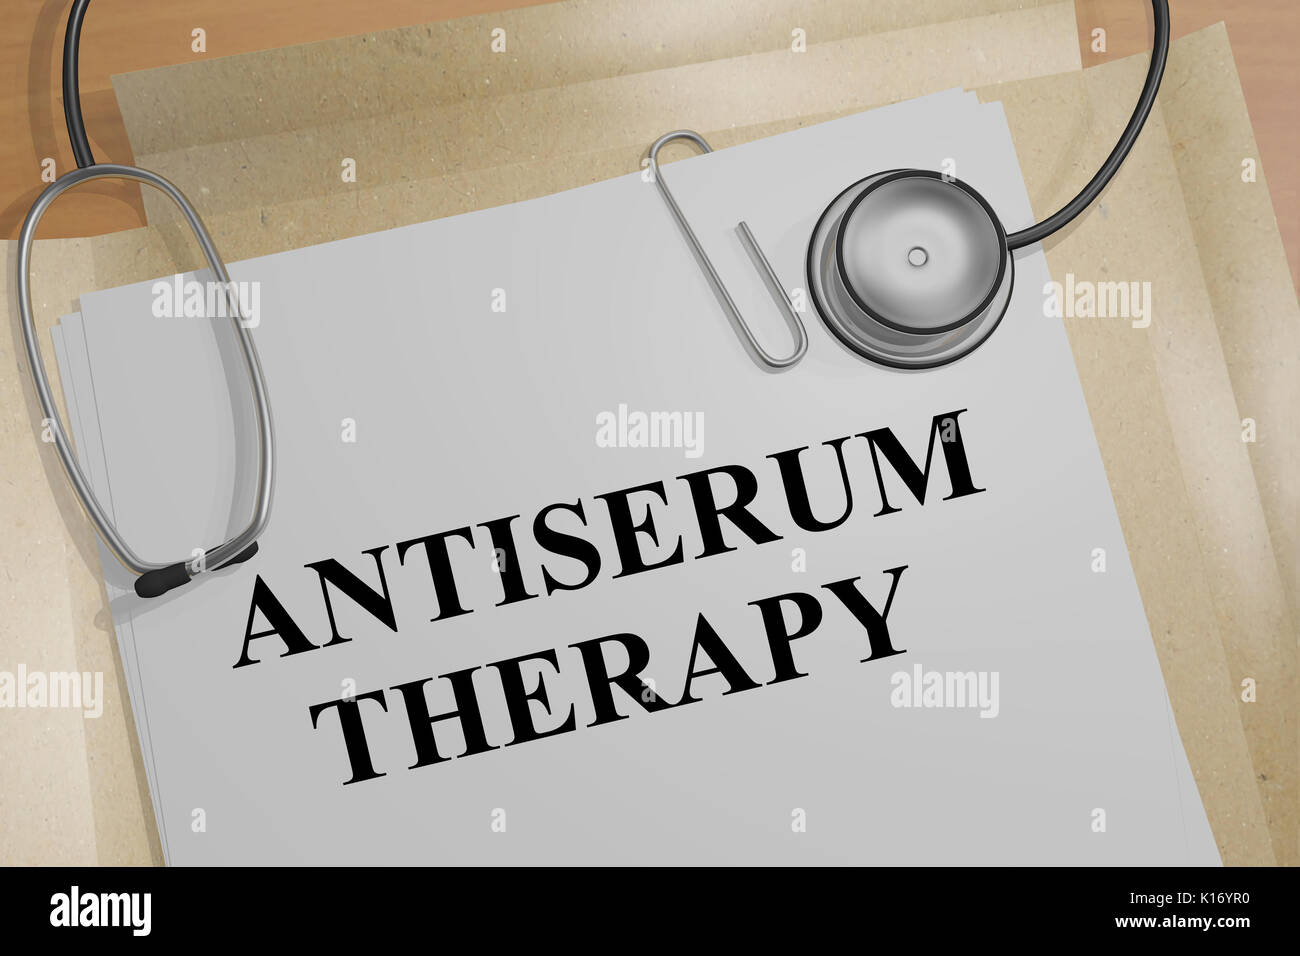 3D illustration of 'ANTISERUM THERAPY' title on a document Stock Photo